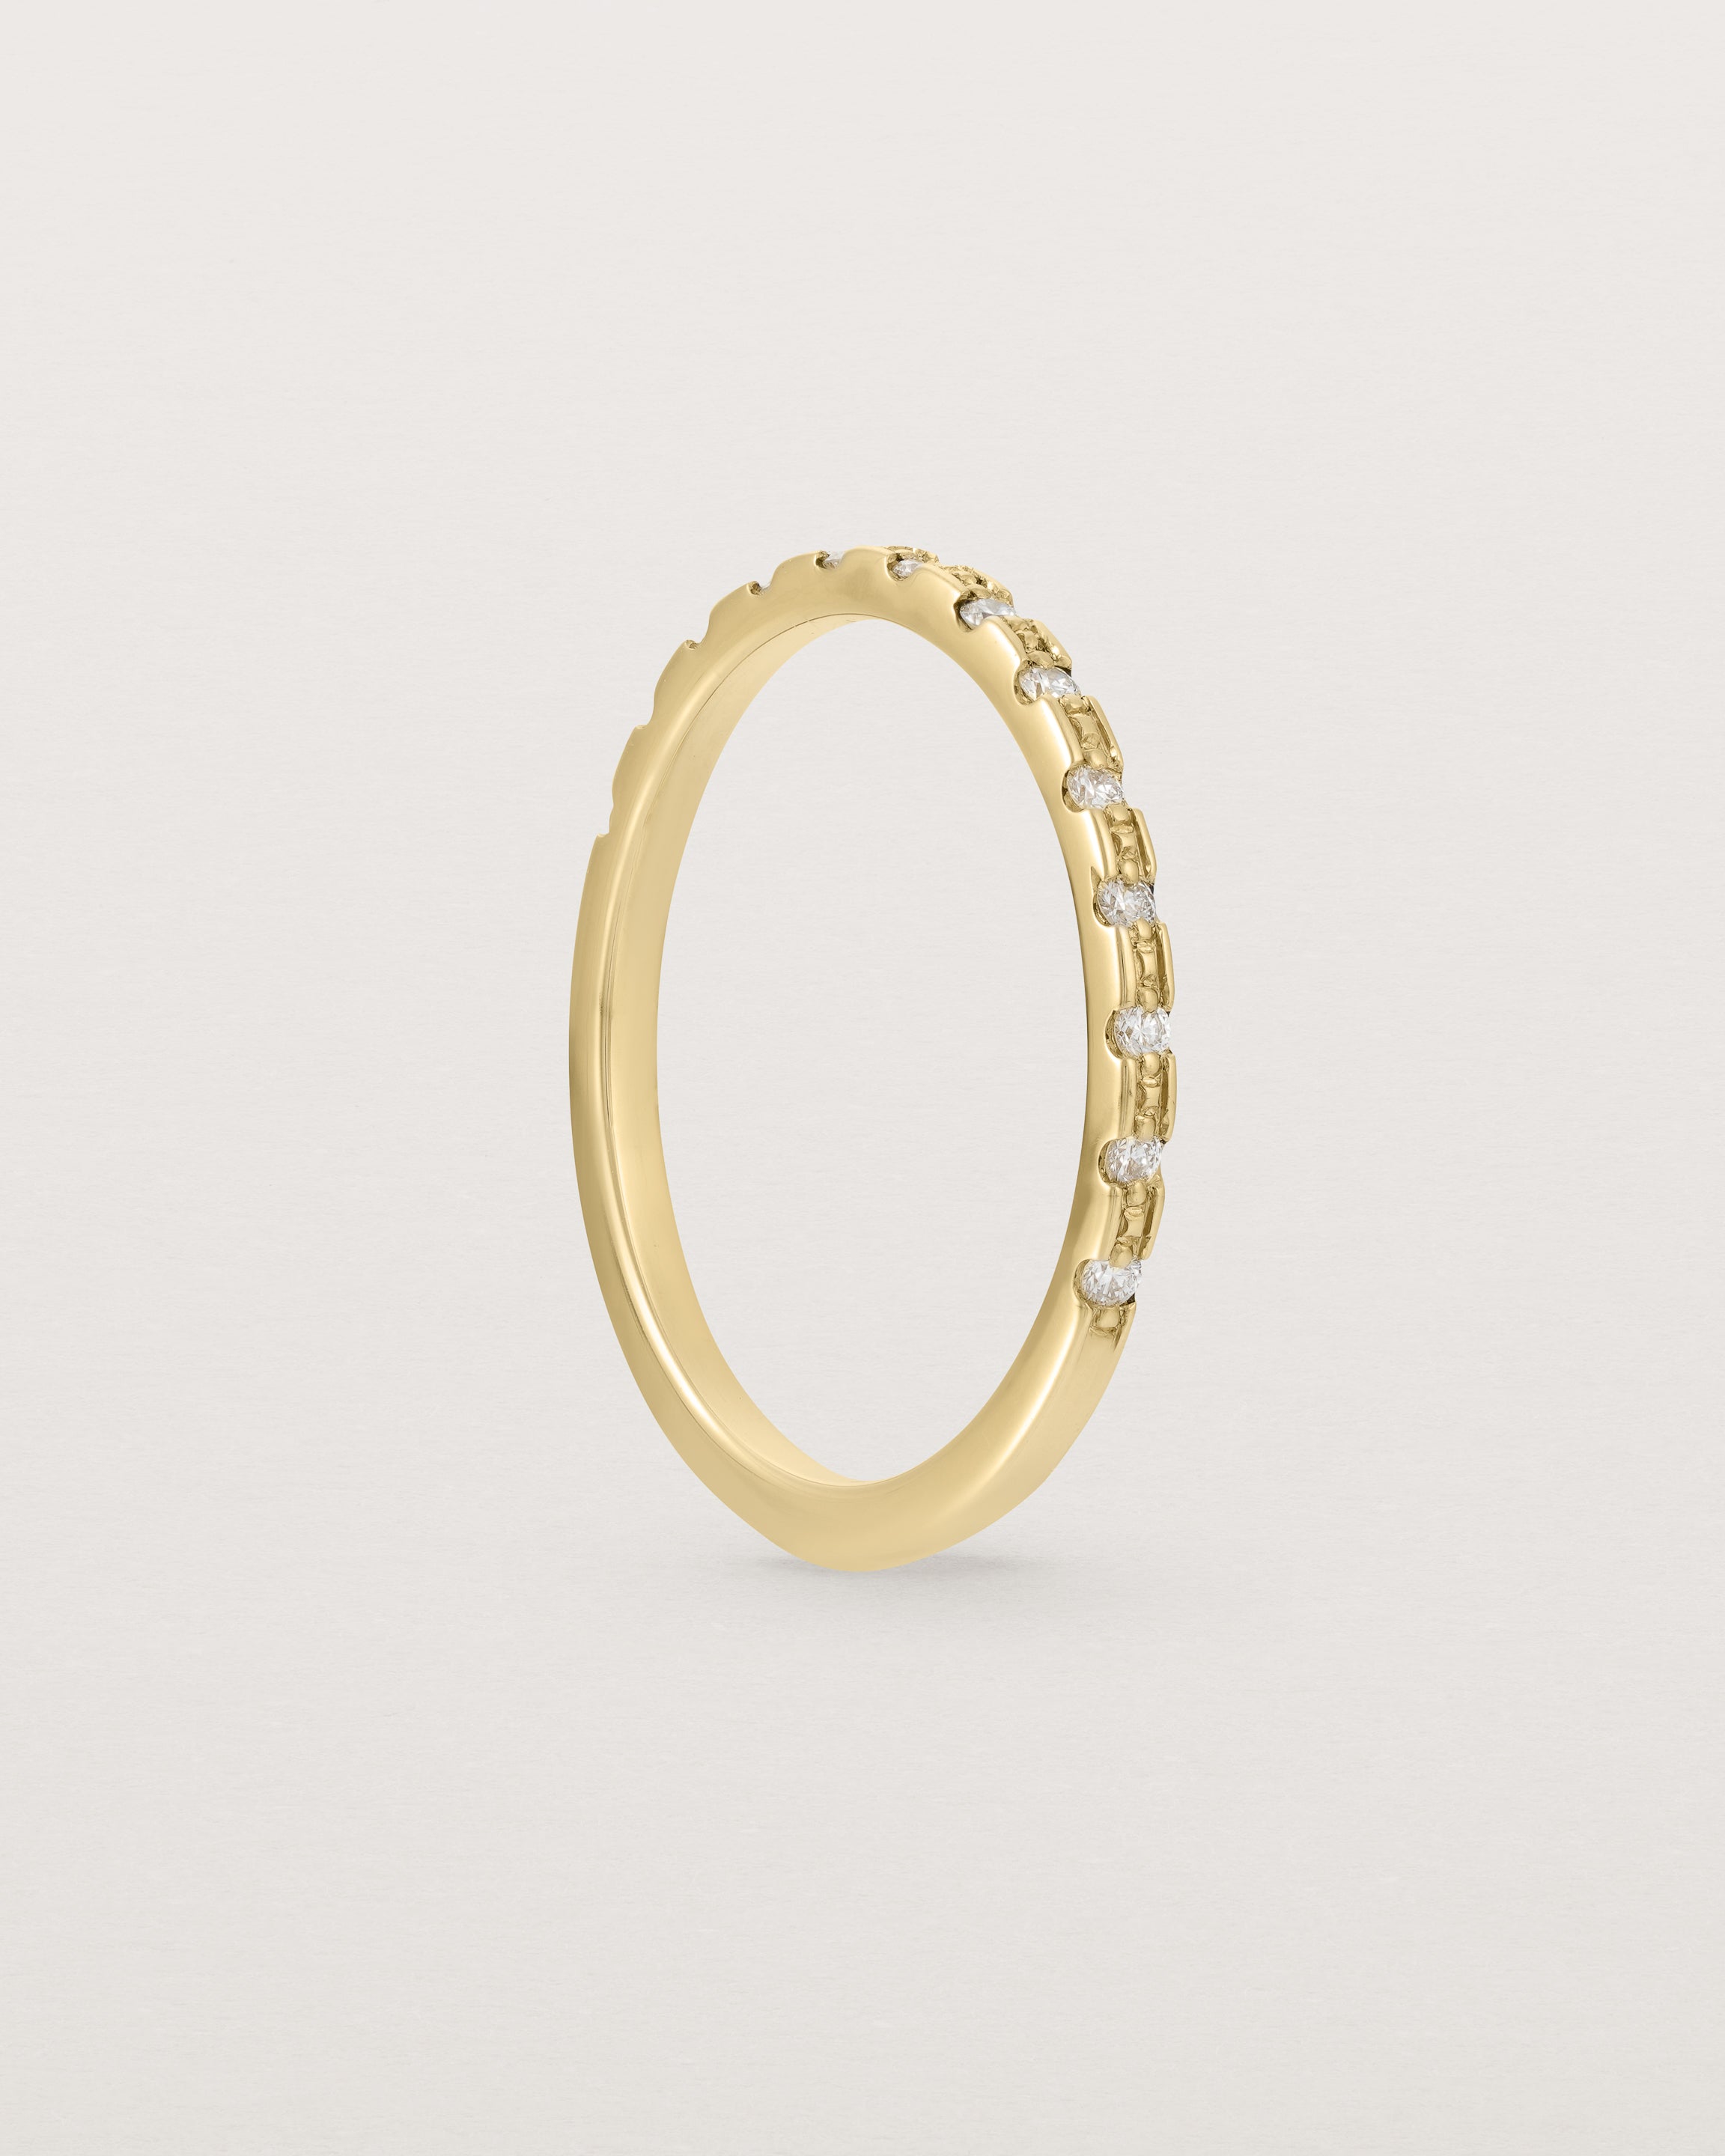 Standing View of Cascade Square Profile Wedding Ring | Diamonds | Yellow Gold